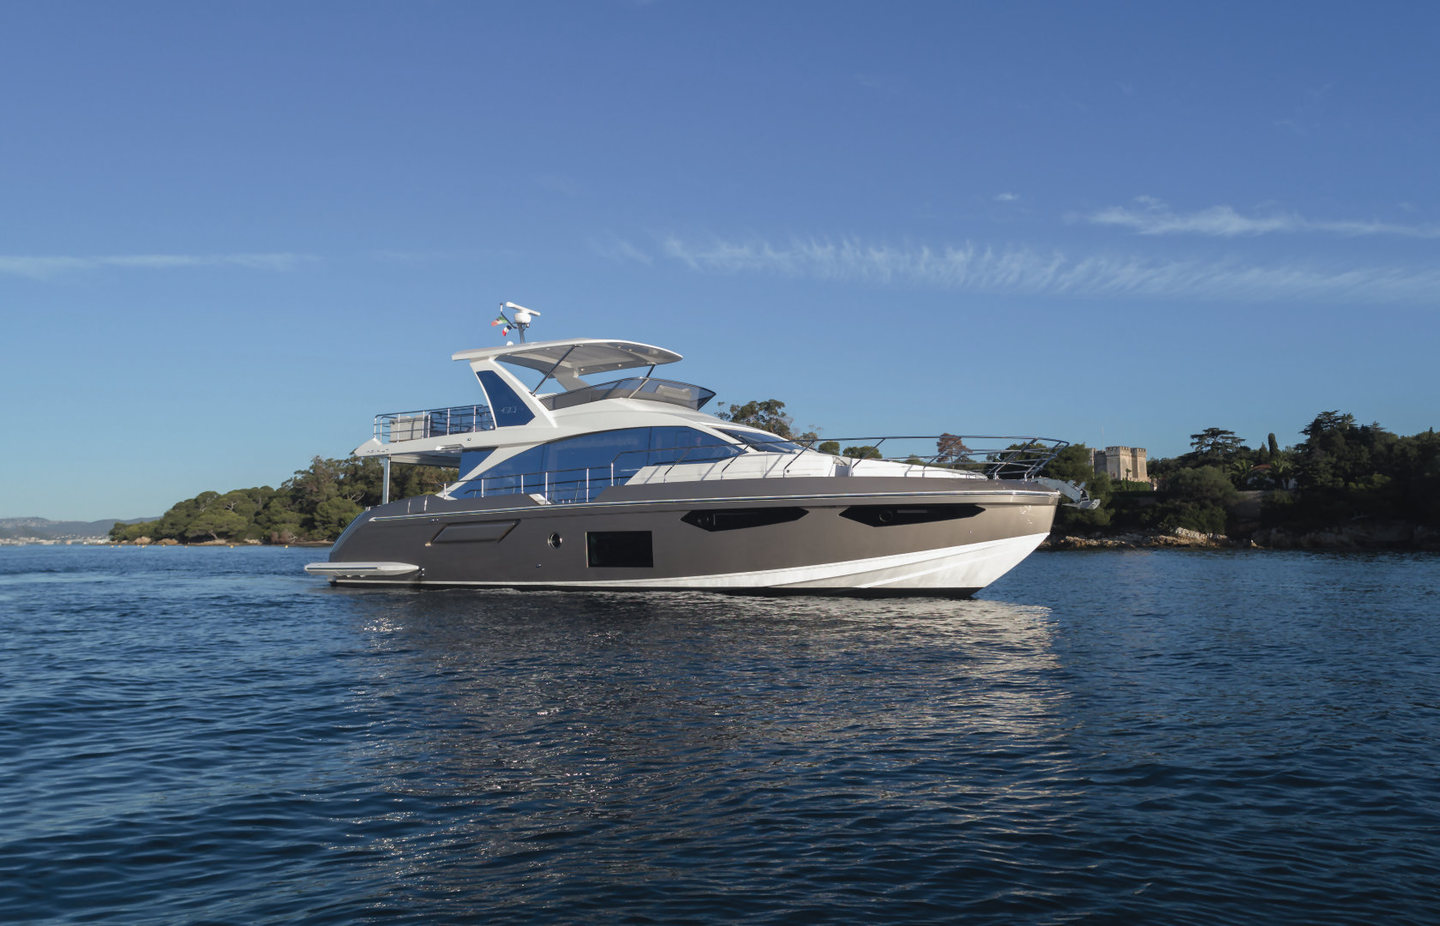 360 VR Virtual Tours of the Azimut Fly 60